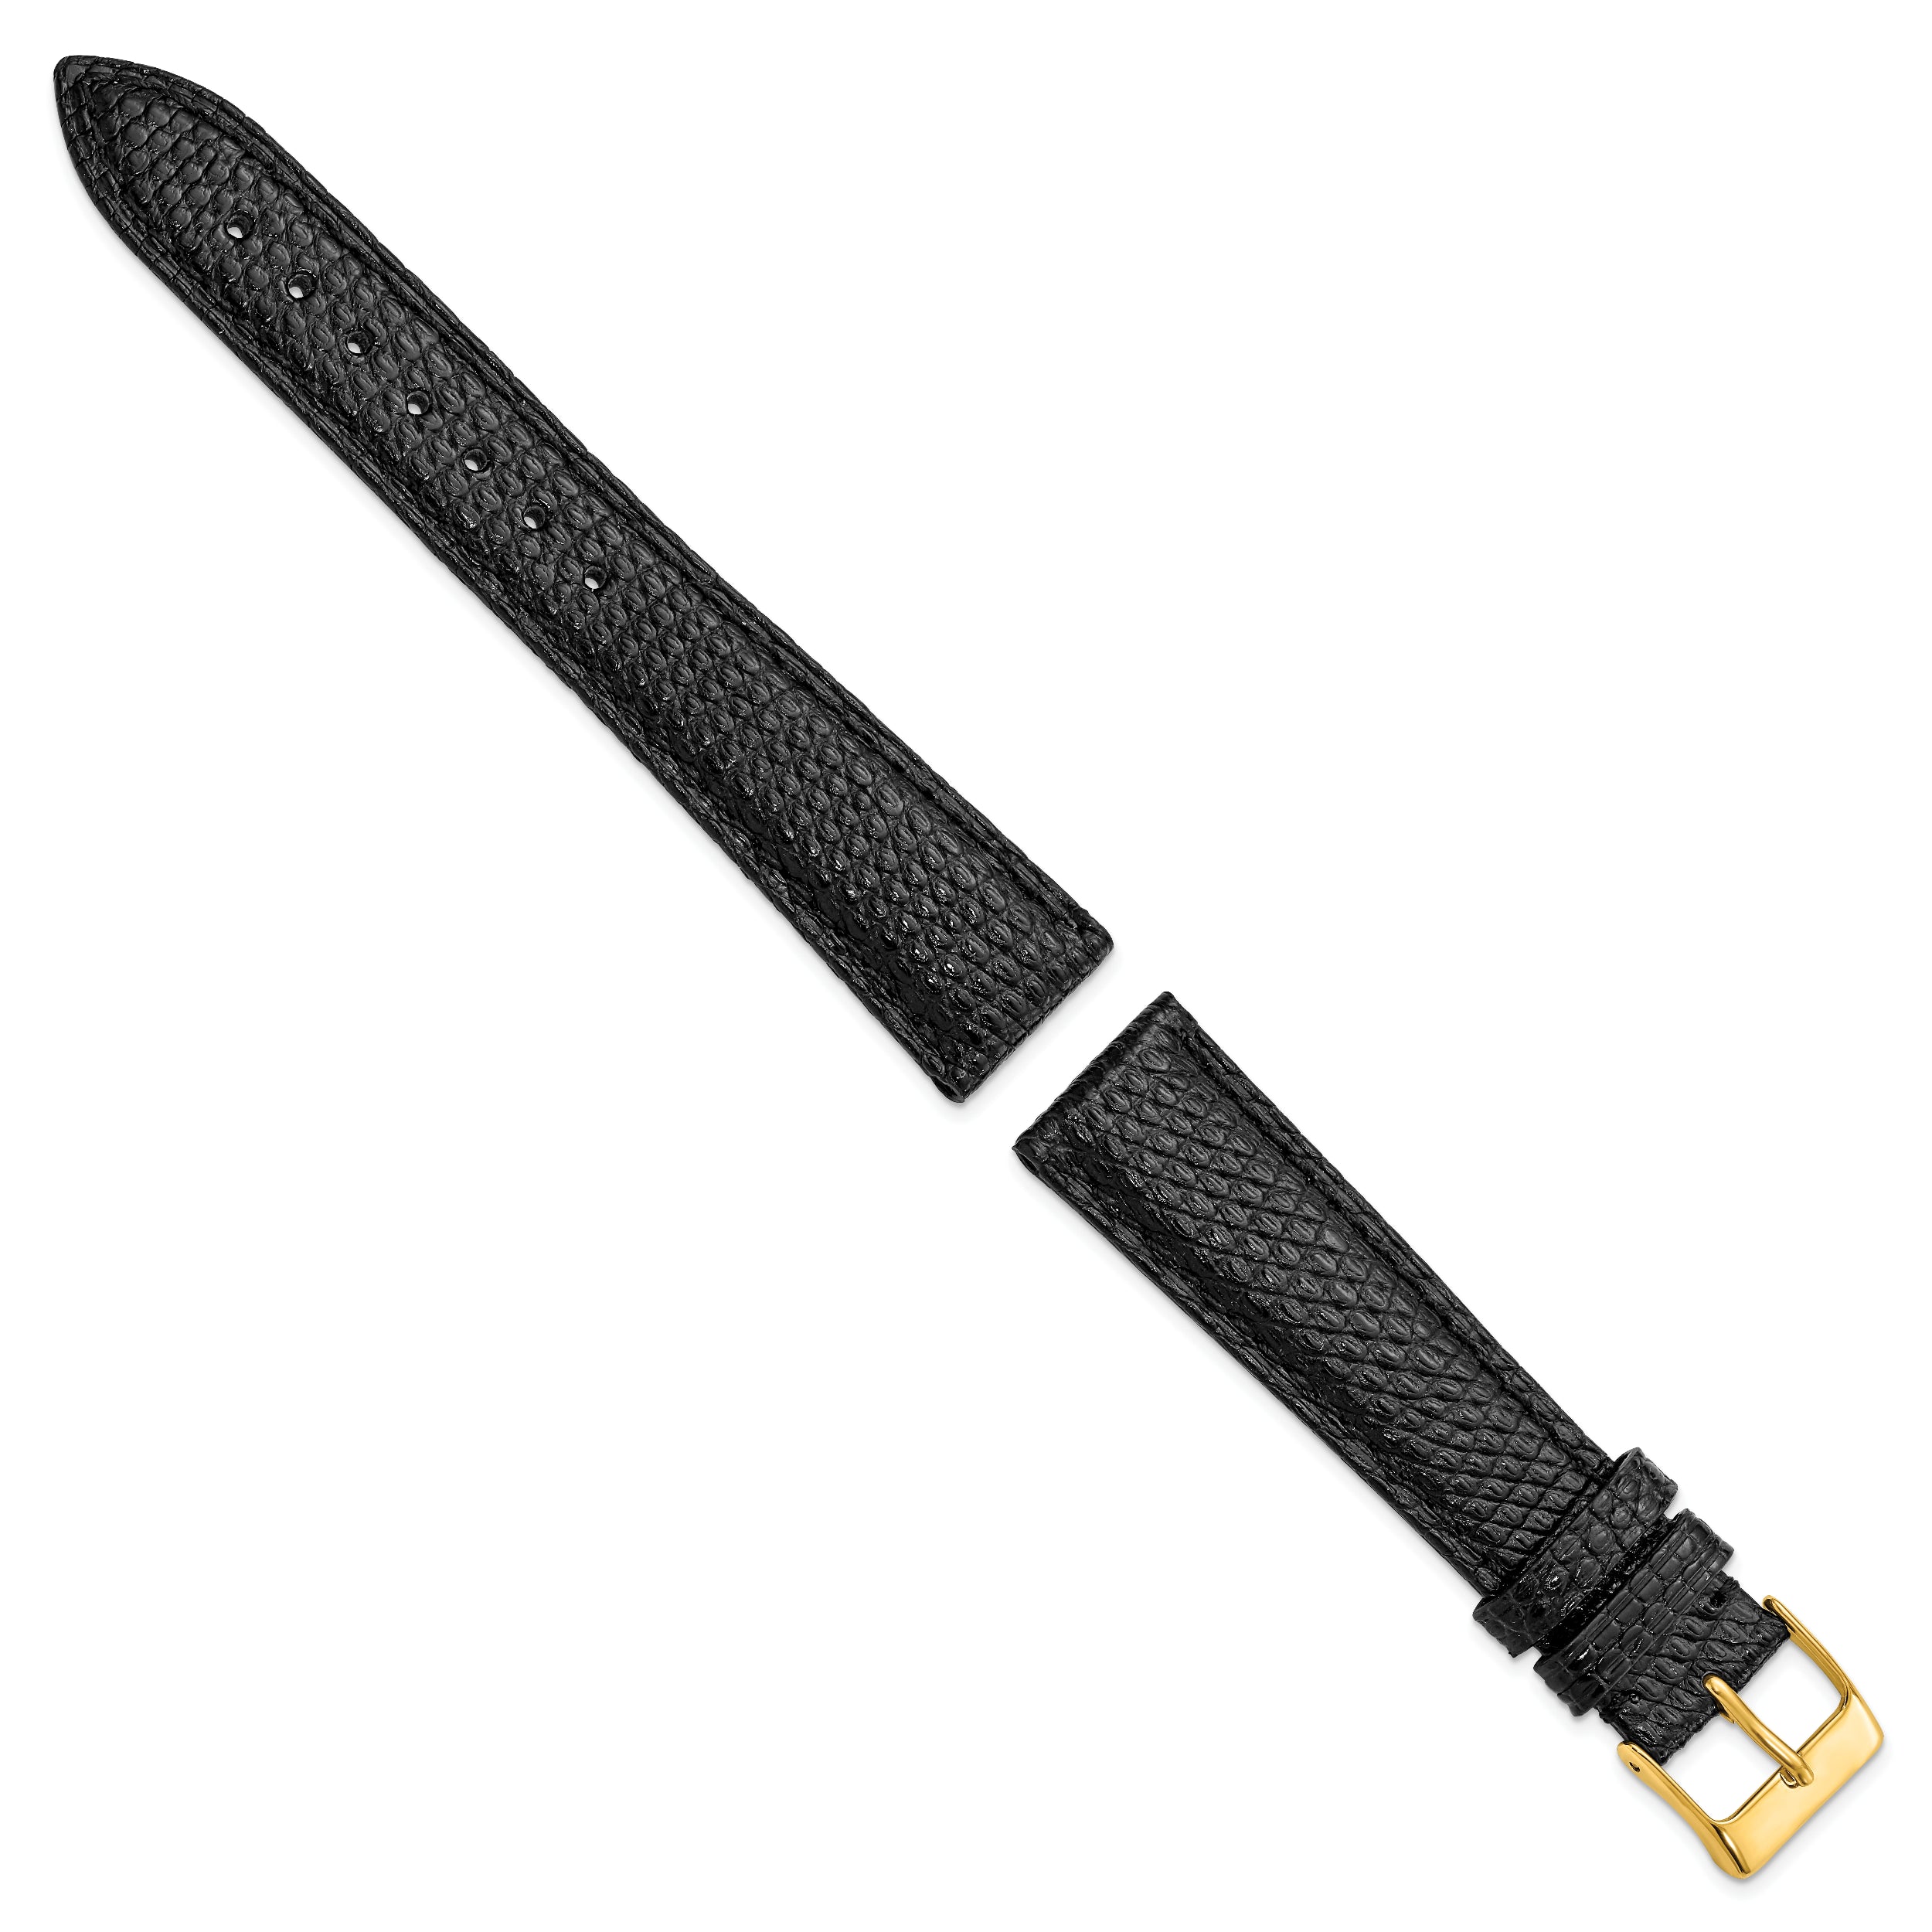 14mm Black Genuine Lizard Leather with Gold-tone Buckle 6.75 inch Watch Band